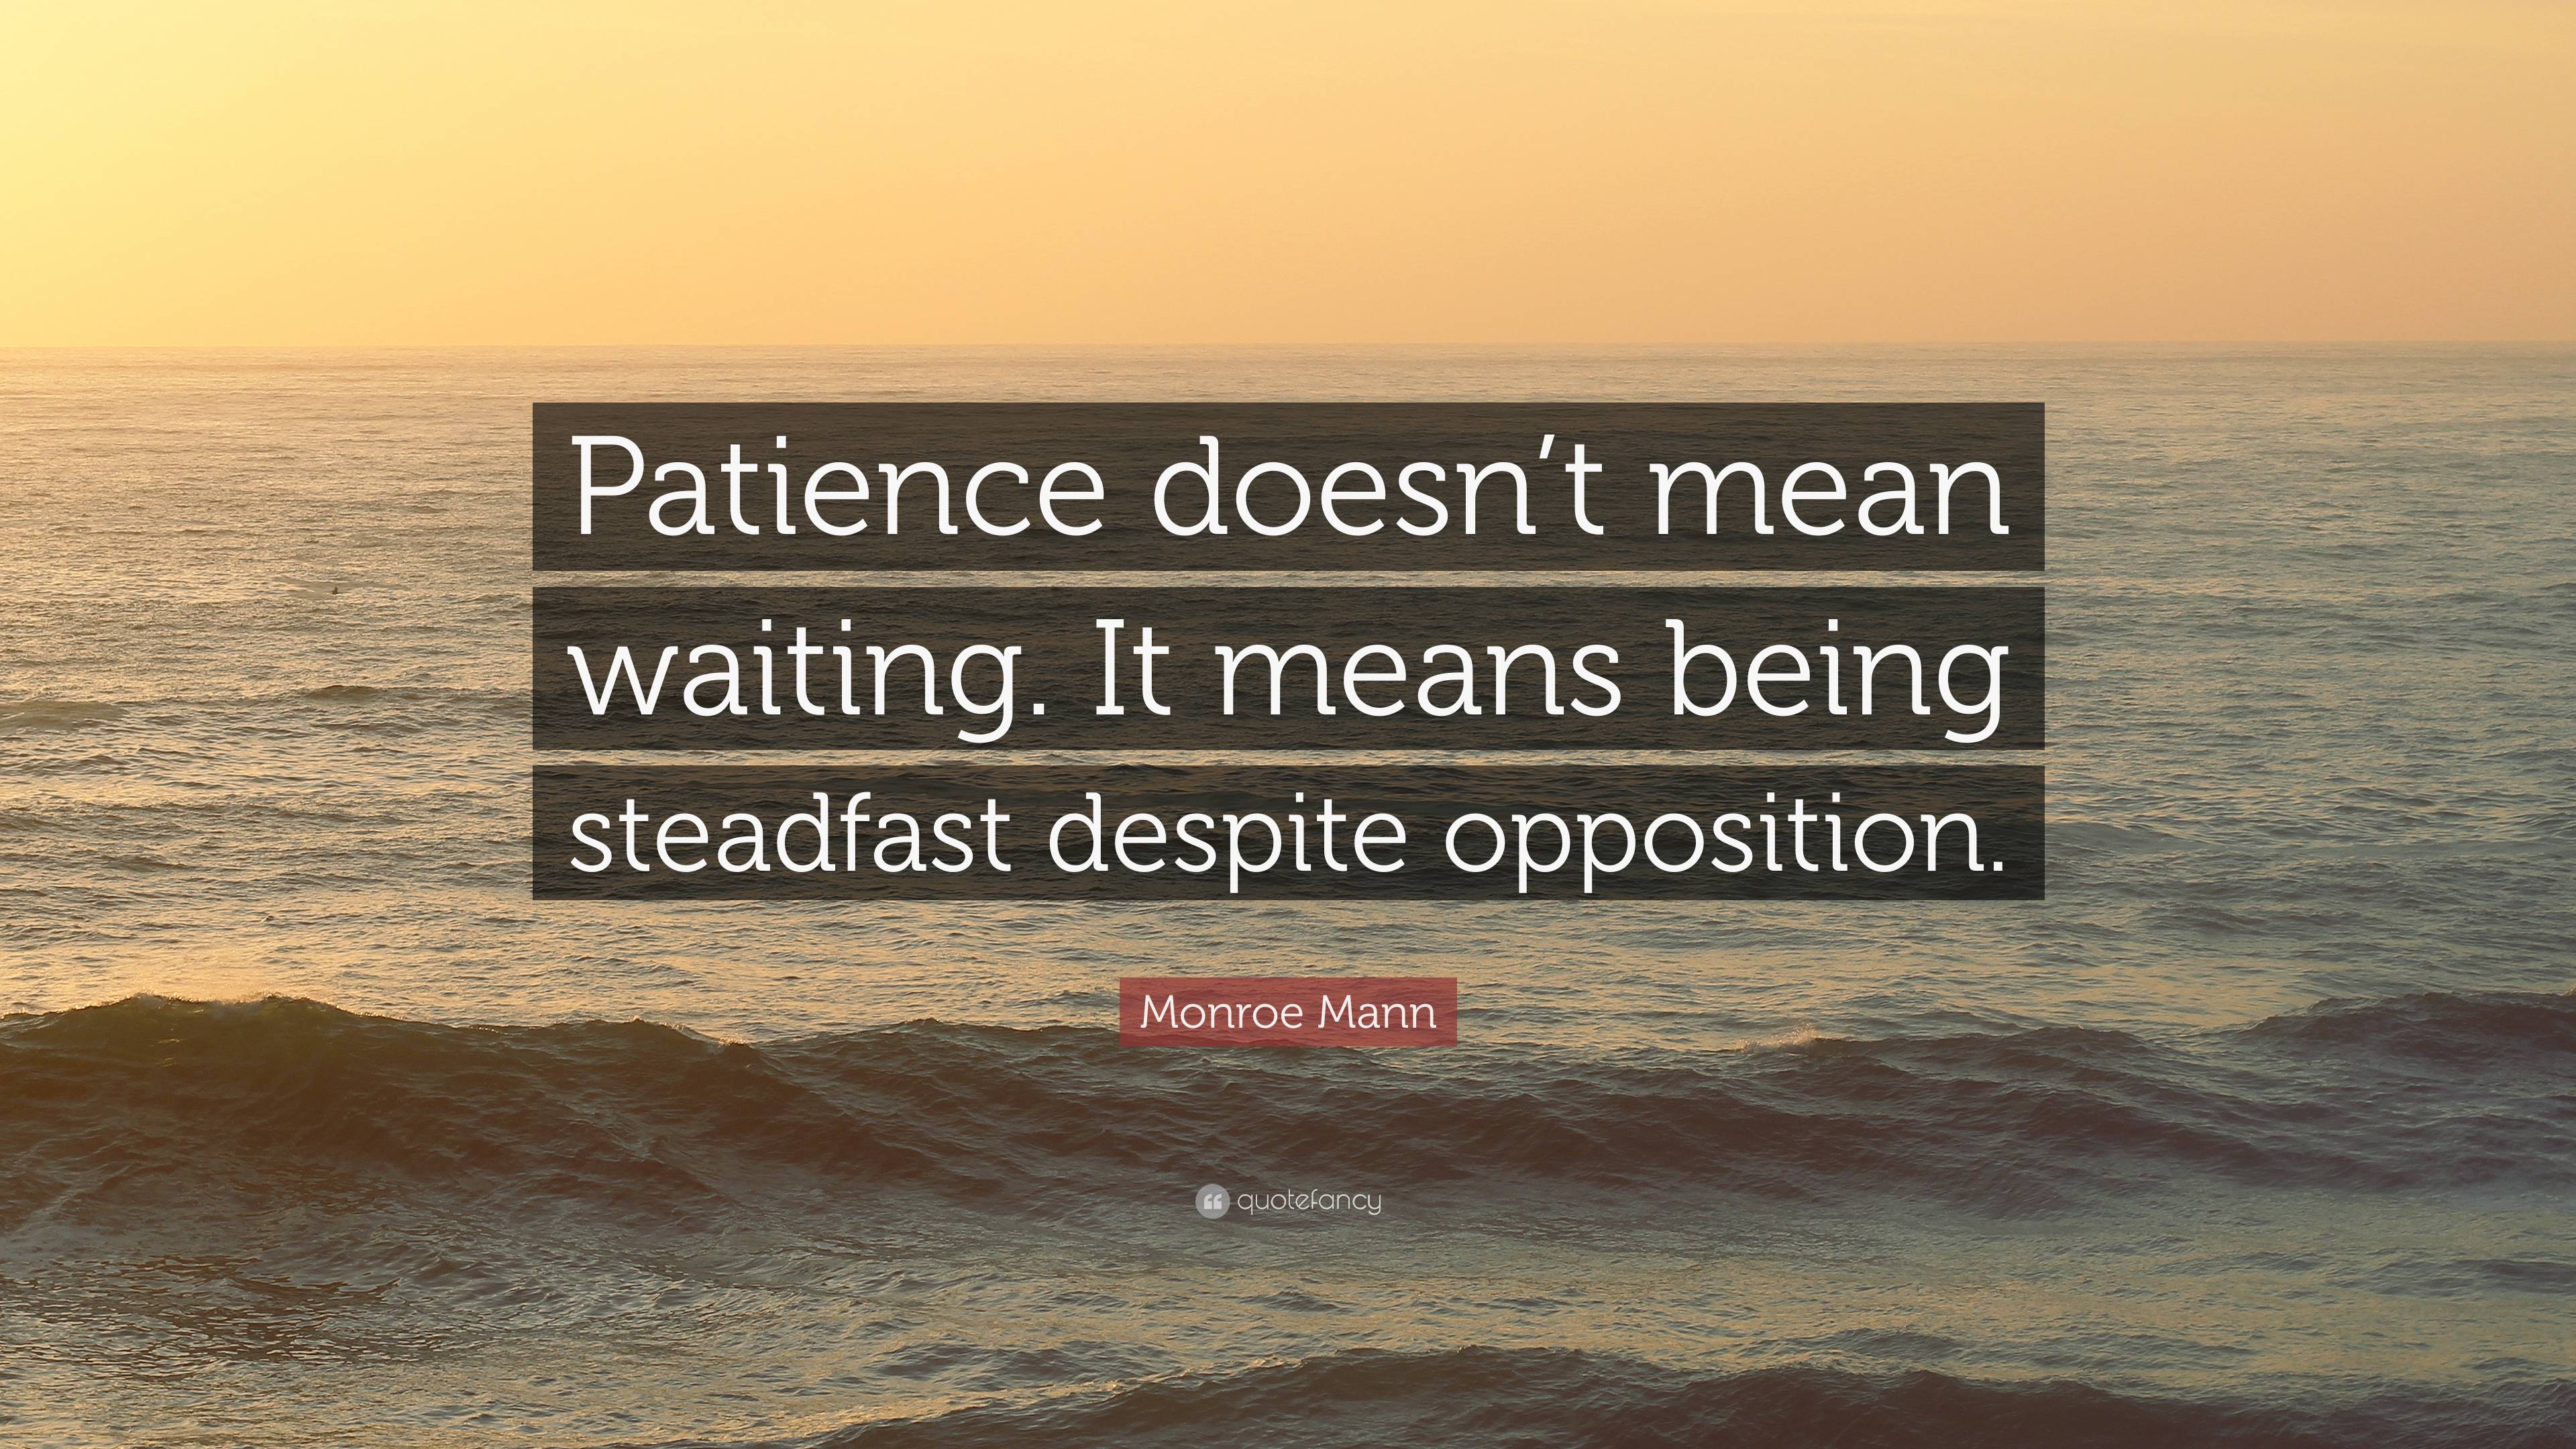 https://quotefancy.com/media/wallpaper/3840x2160/7464283-Monroe-Mann-Quote-Patience-doesn-t-mean-waiting-It-means-being.jpg